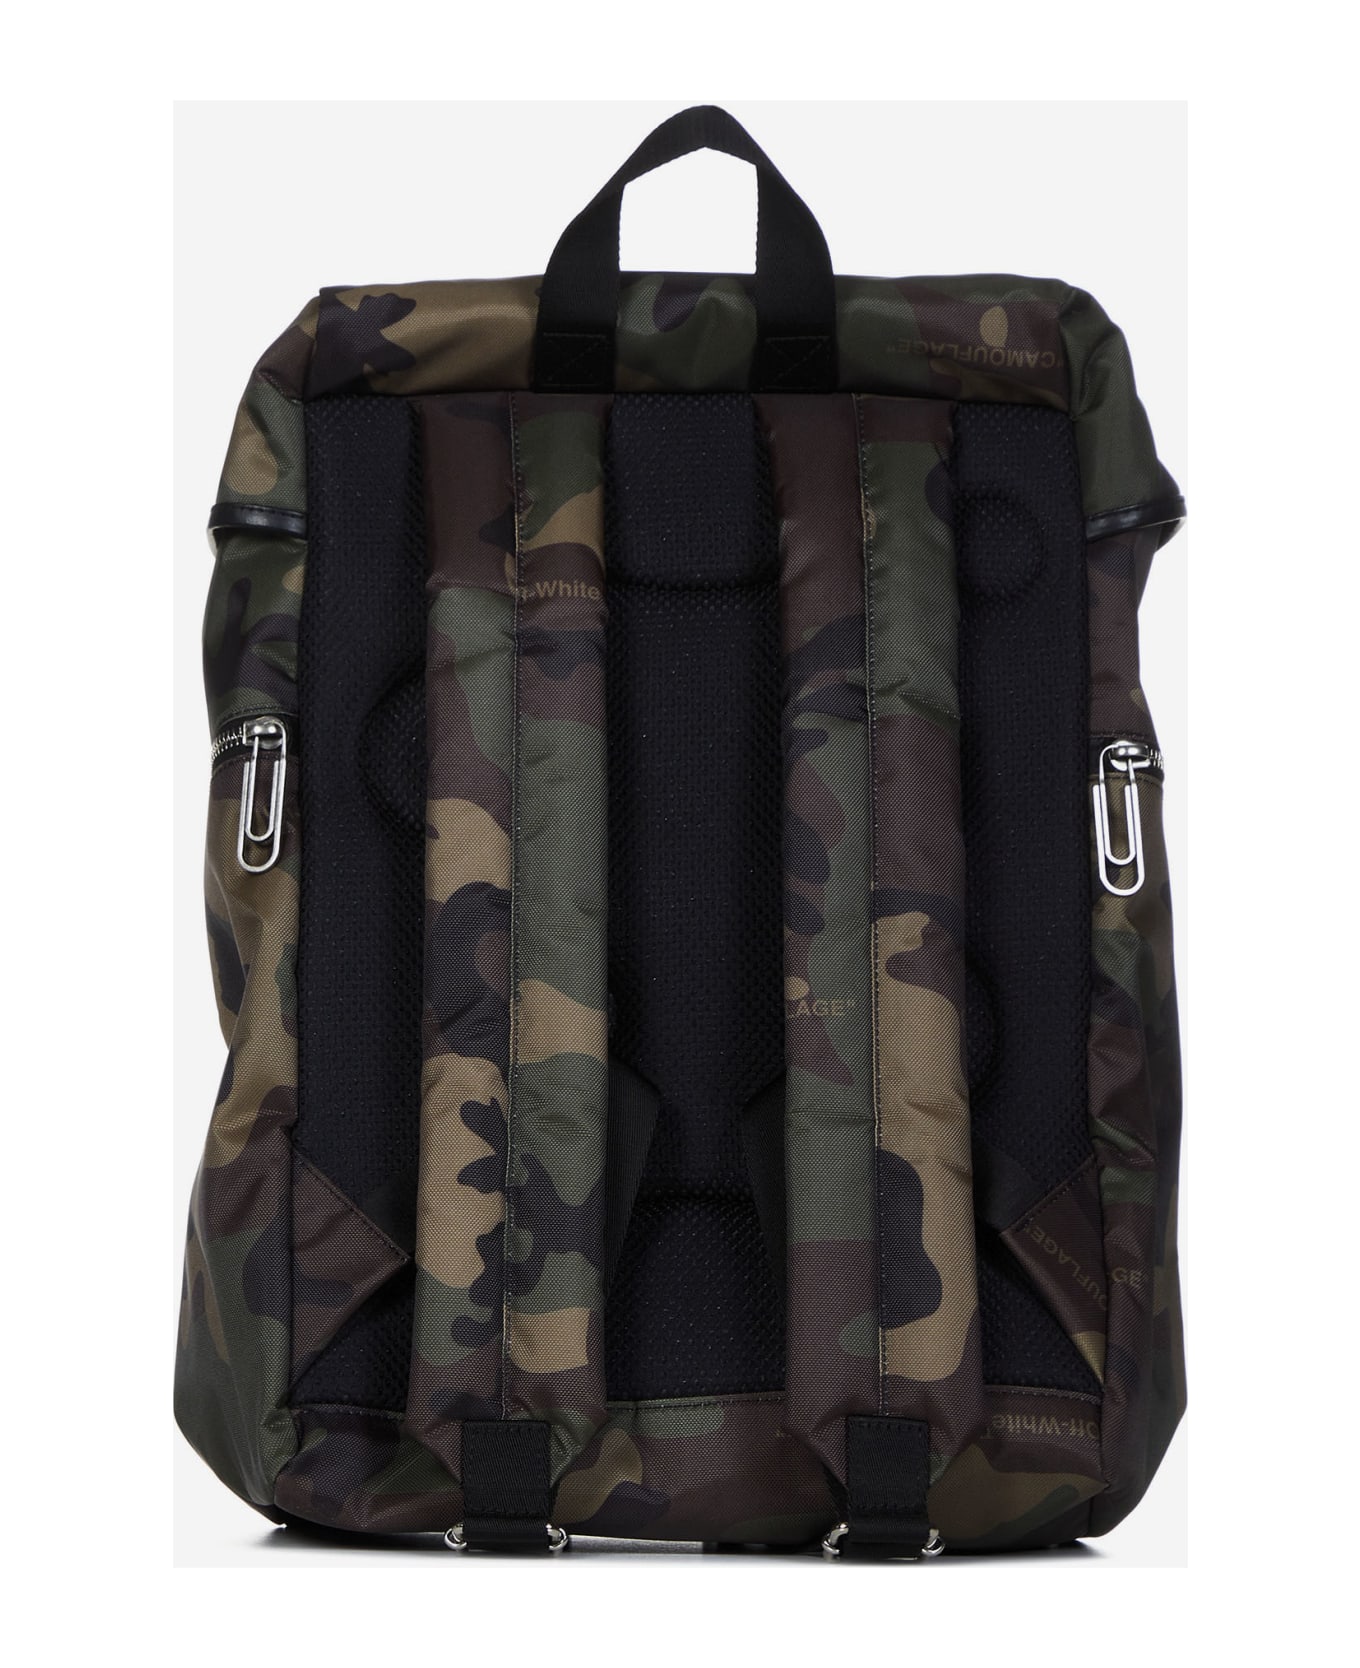 Off-White Arrow Tuc Backpack - Multicolore